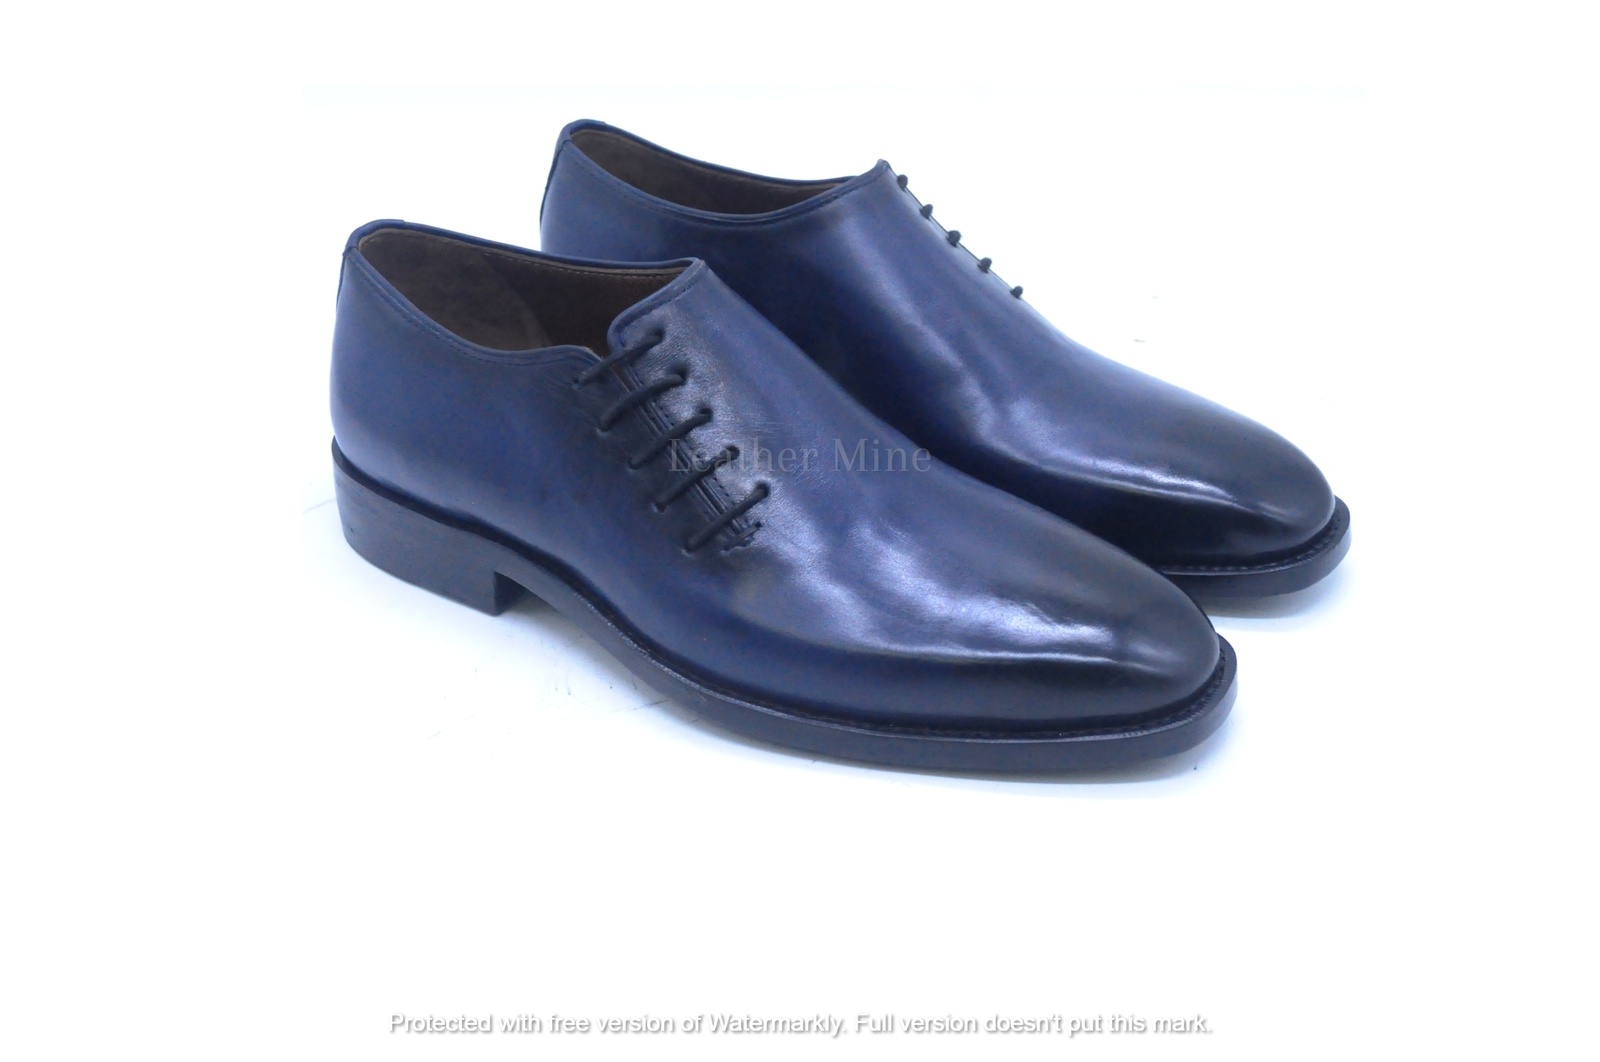 Leather Blue Patina Whole Cut Oxfords shoes Men's, Handmade Formal Custom Shoes